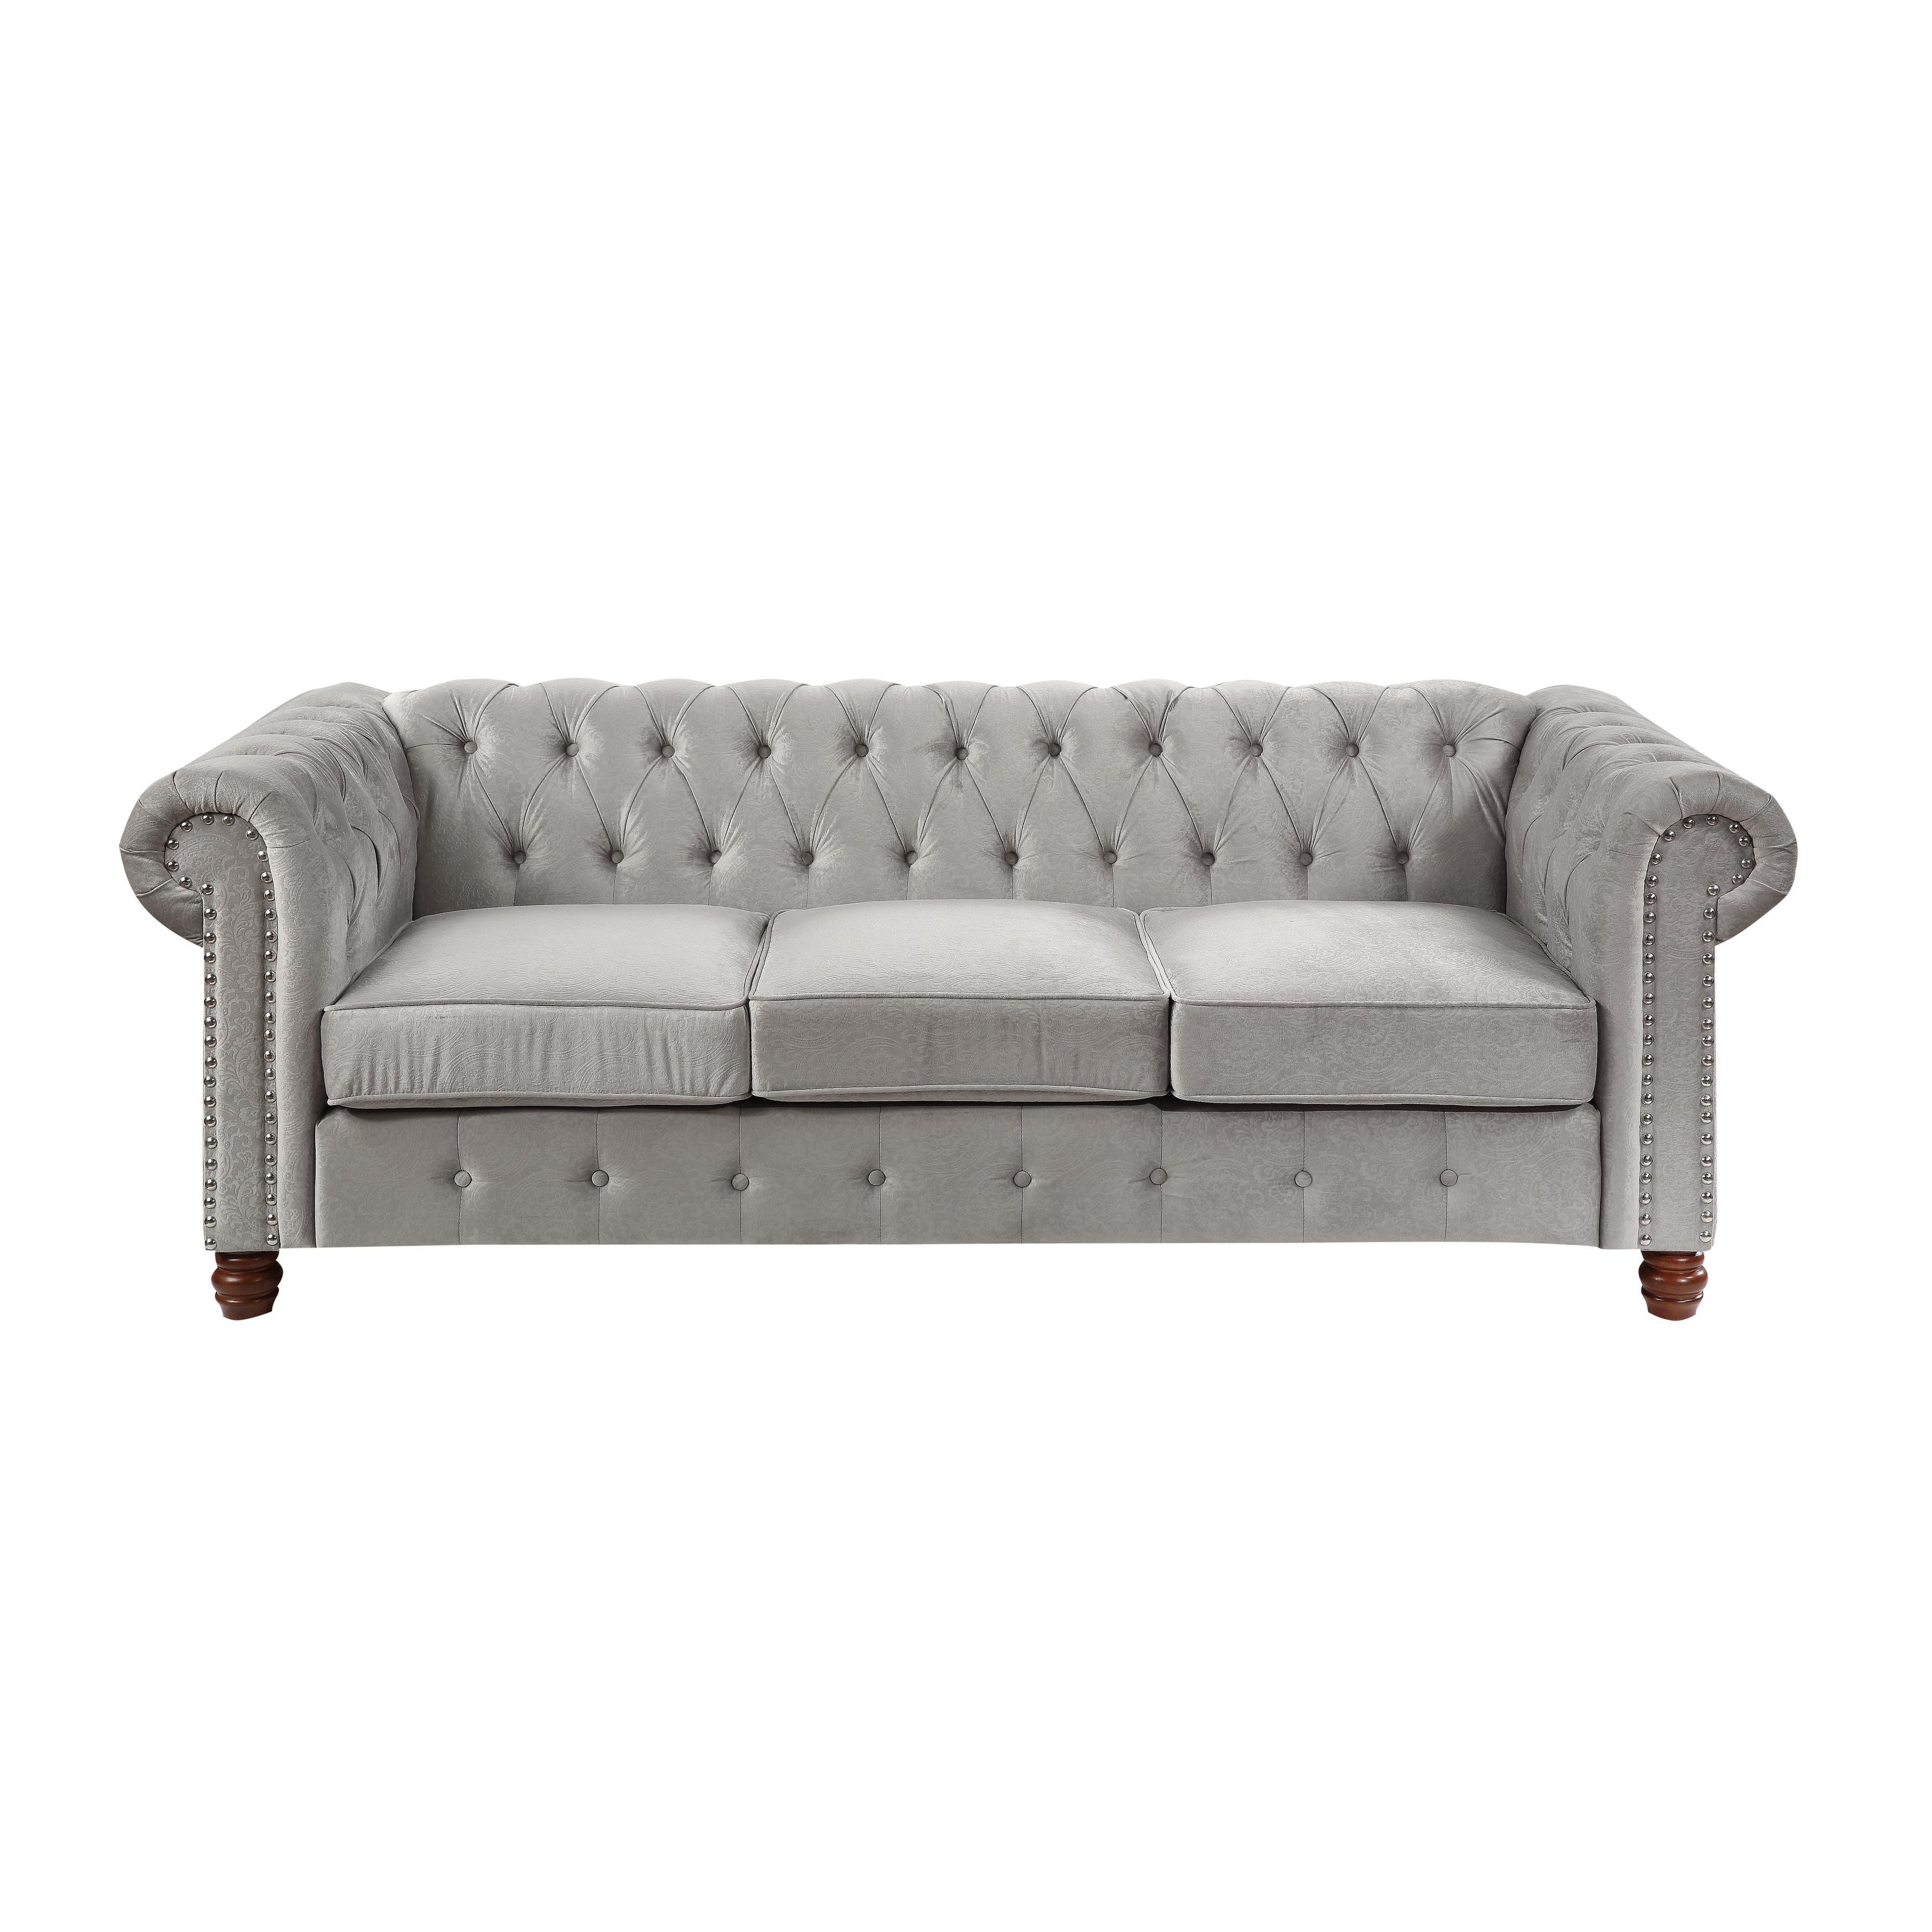 Traditional Sofa 9326GY-3 Welwyn 9326GY-3 in Gray Velvet